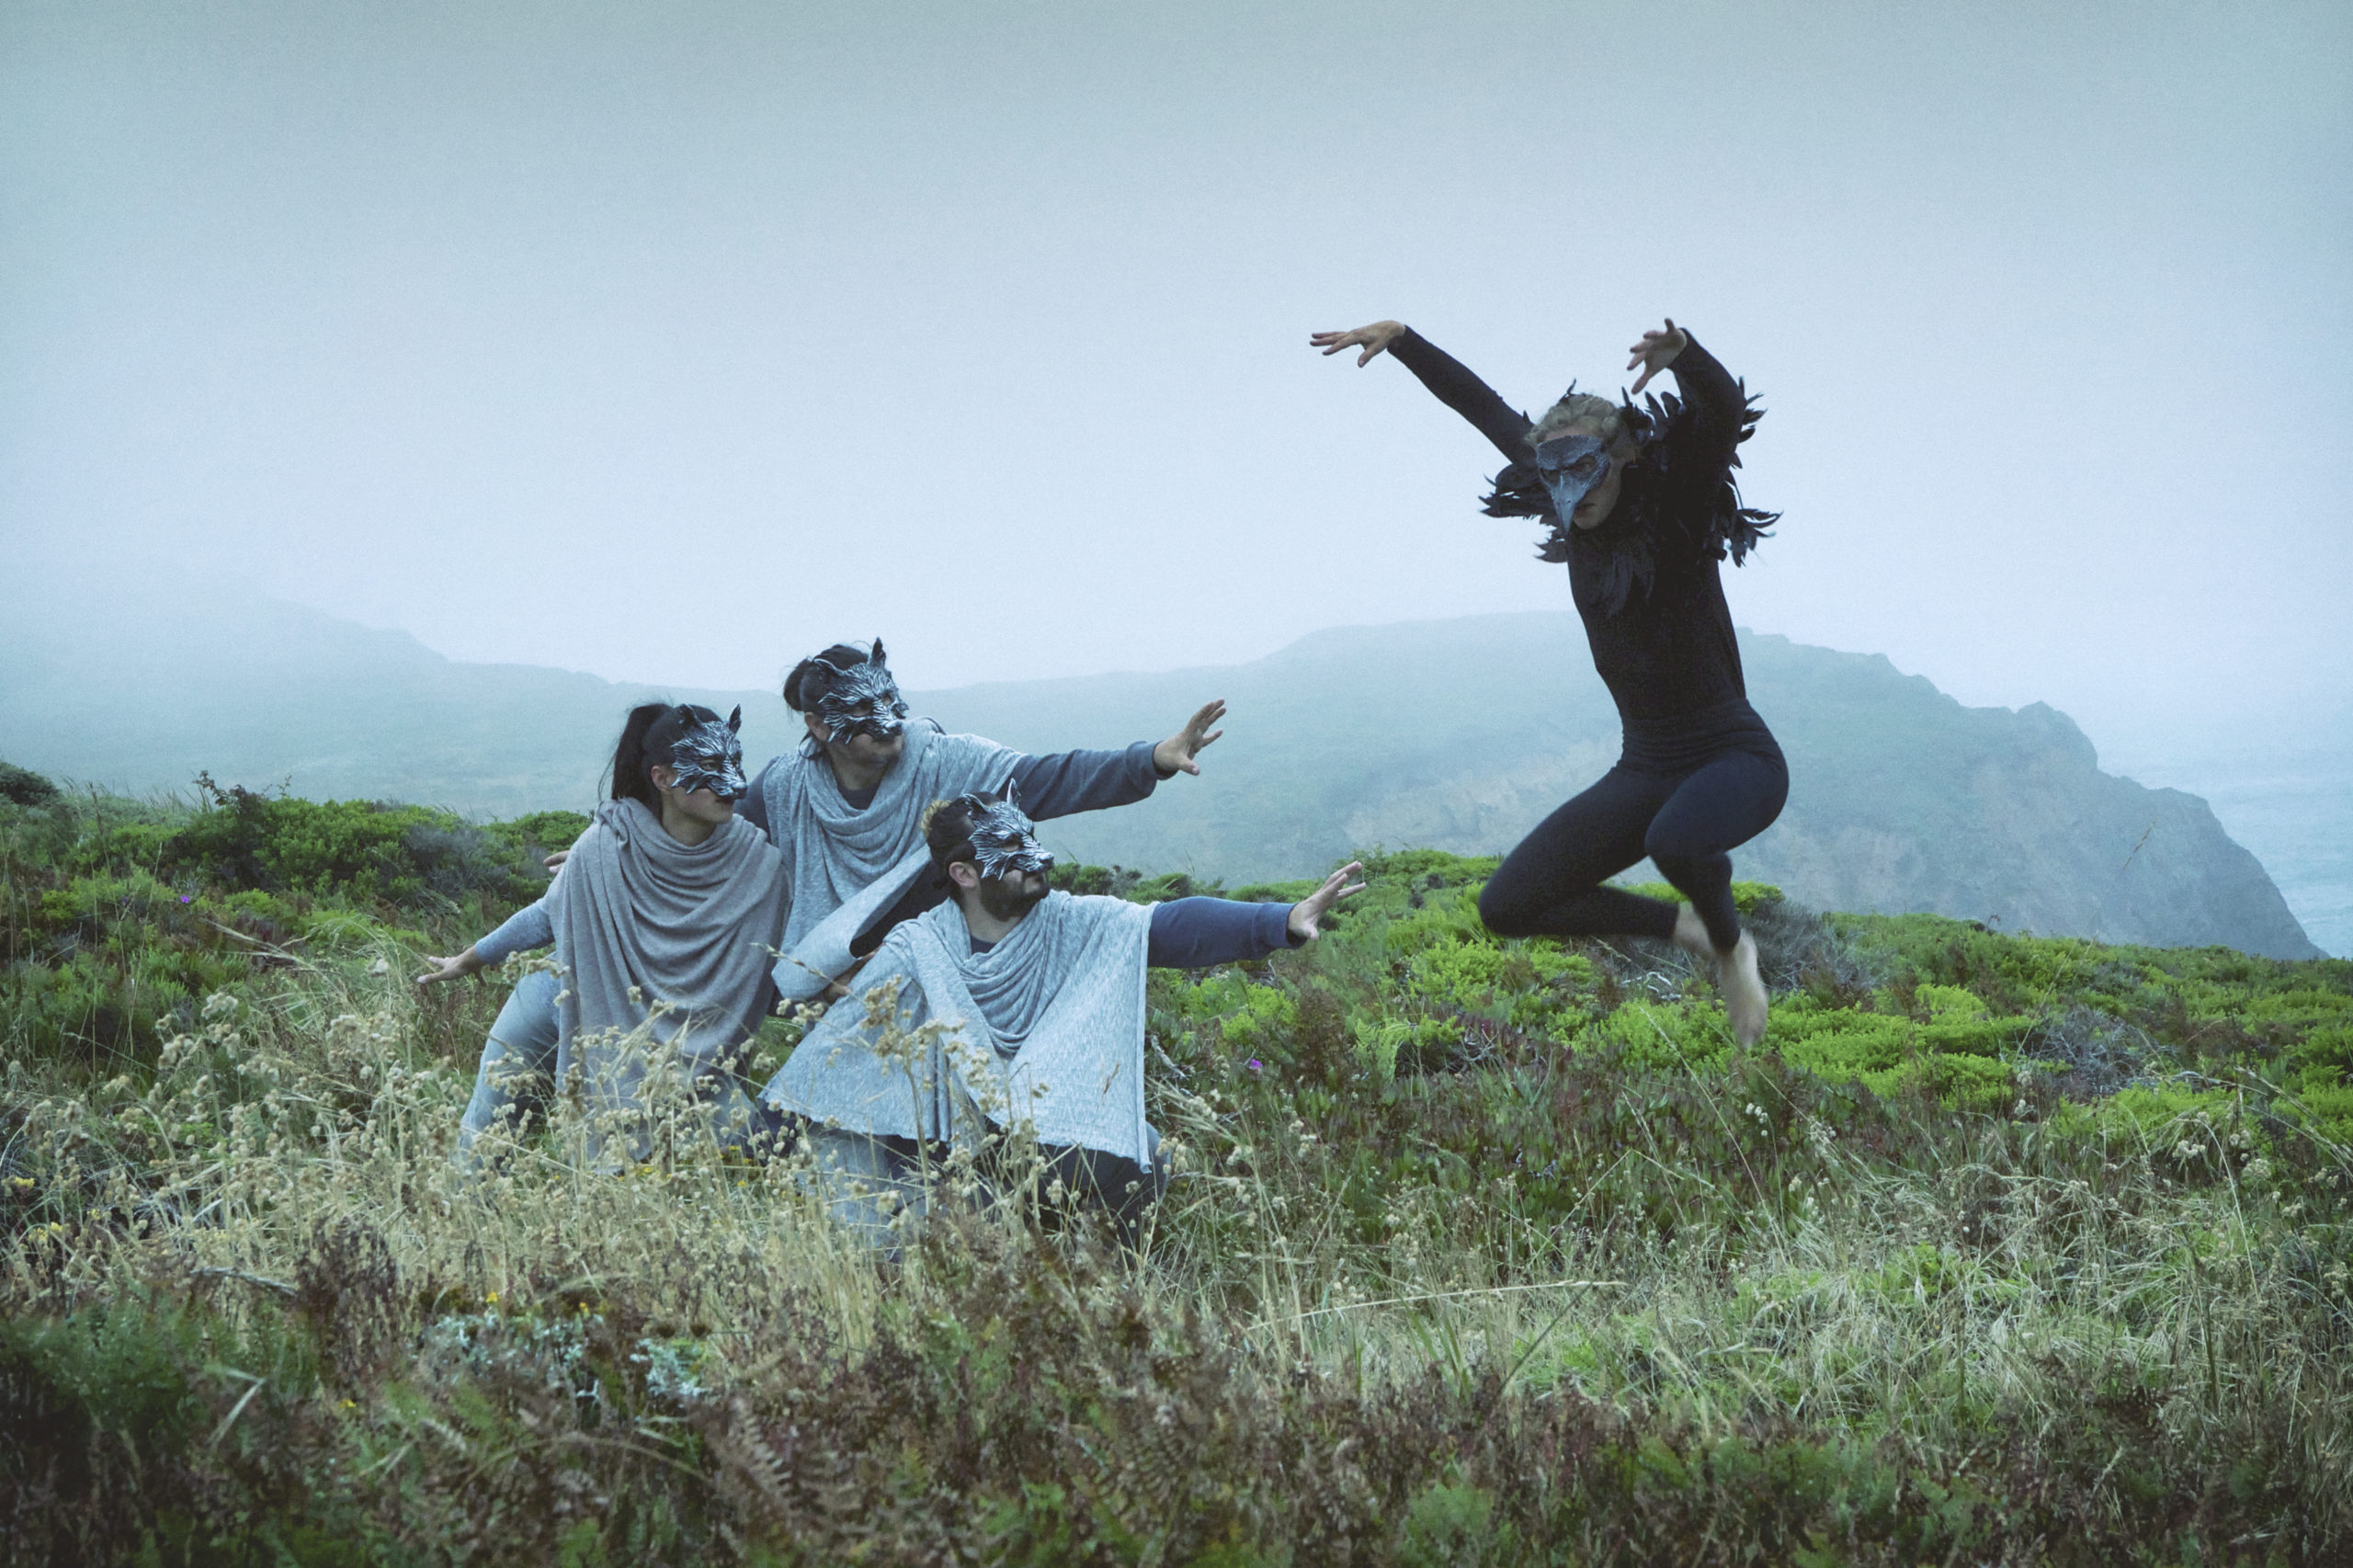 On a seaside cliff, three dancers in wolf masks and light gray clothing focus on a leaping dancer in all black with a crow mask